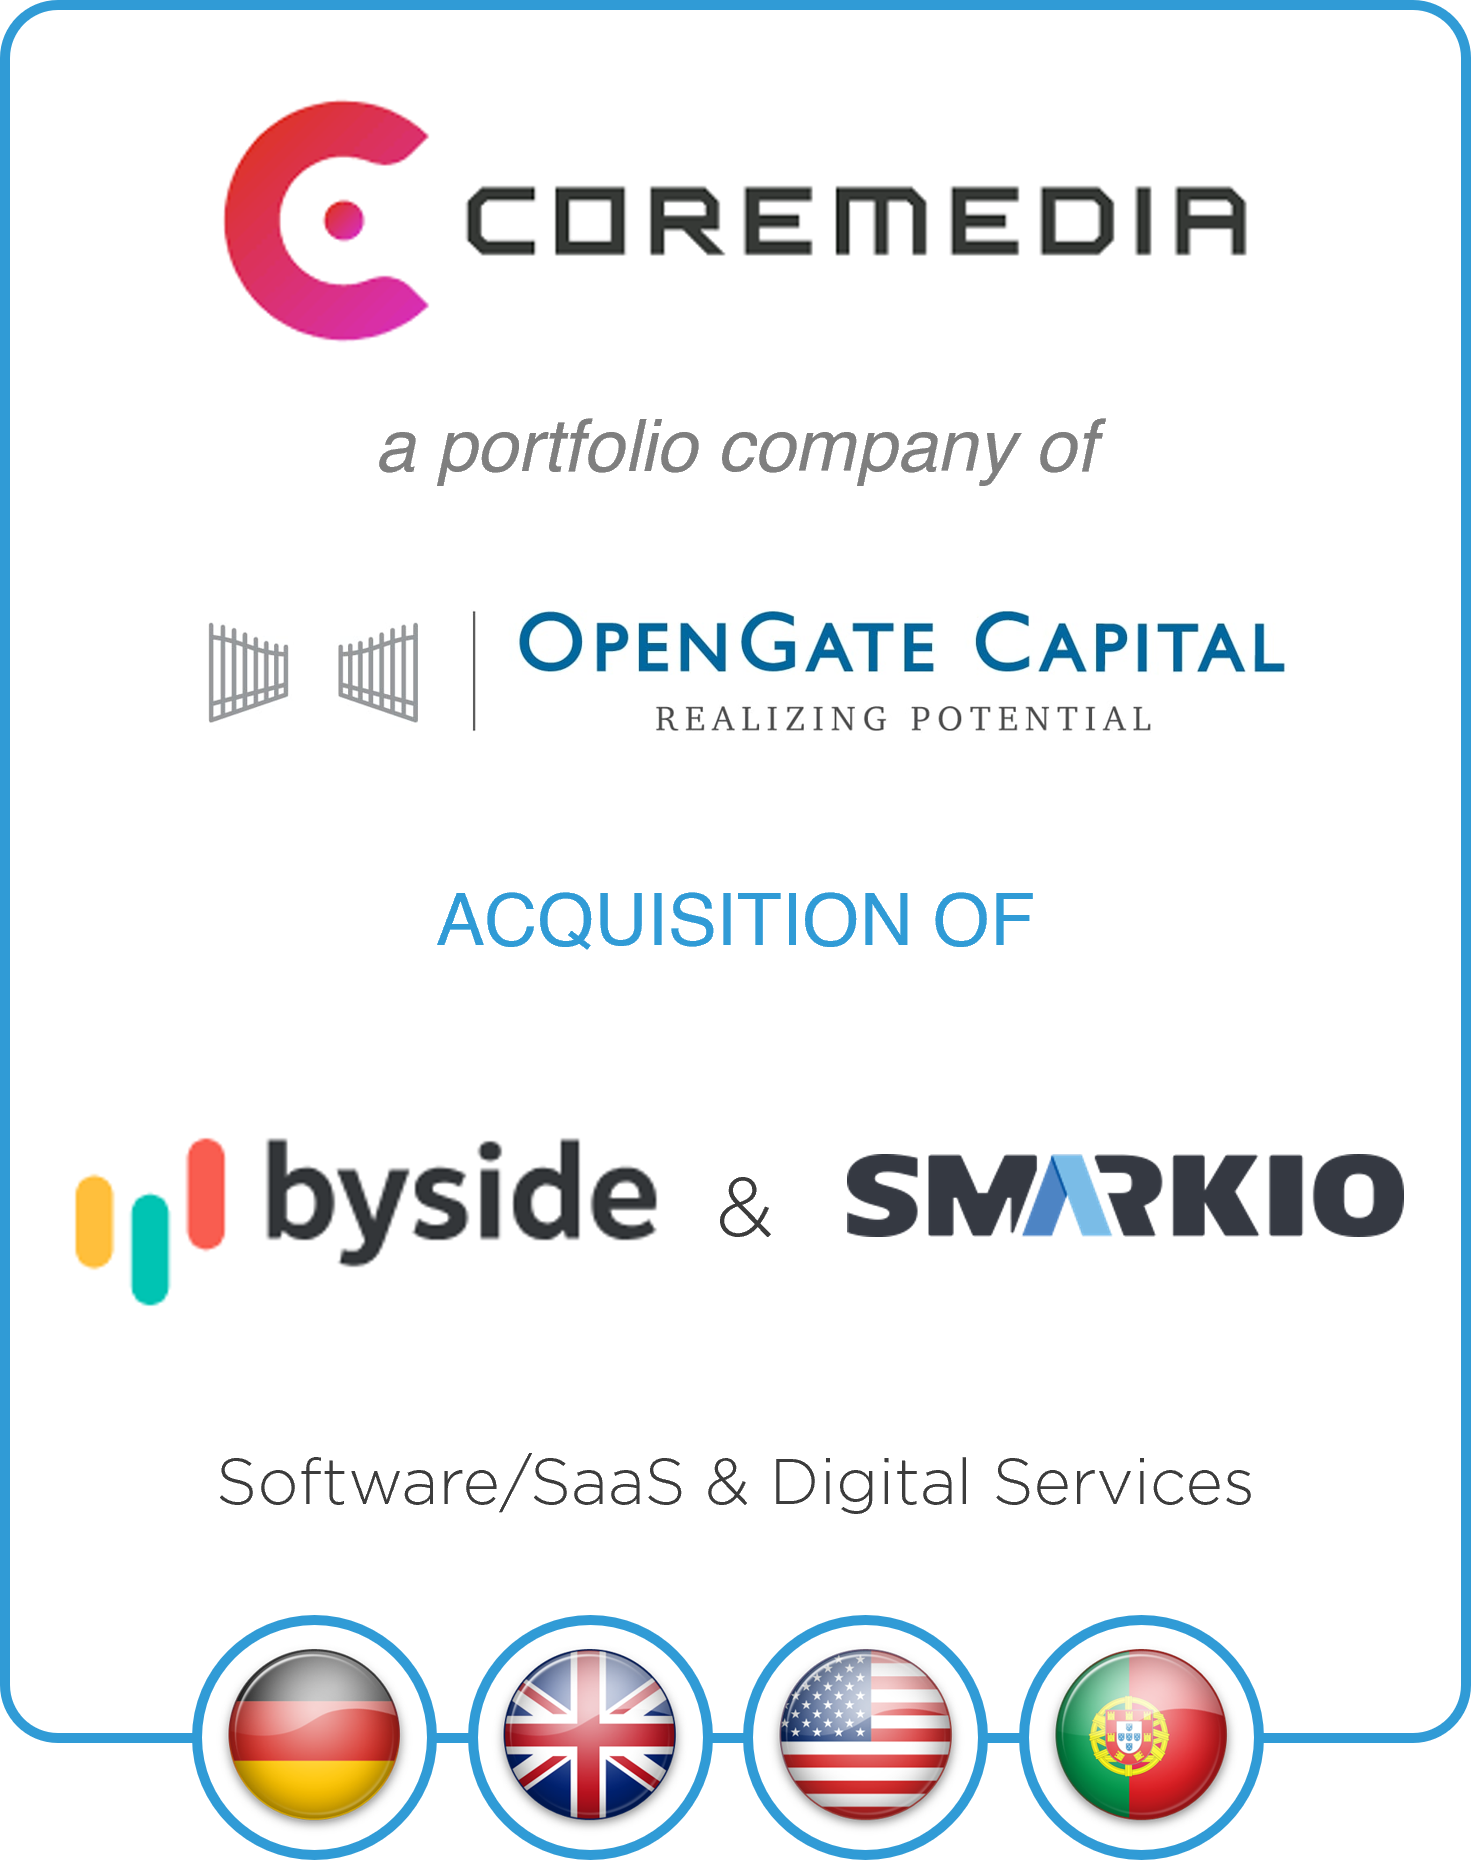 Drake Star Advises CoreMedia and OpenGate Capital on the acquisition of BySide and Smarkio